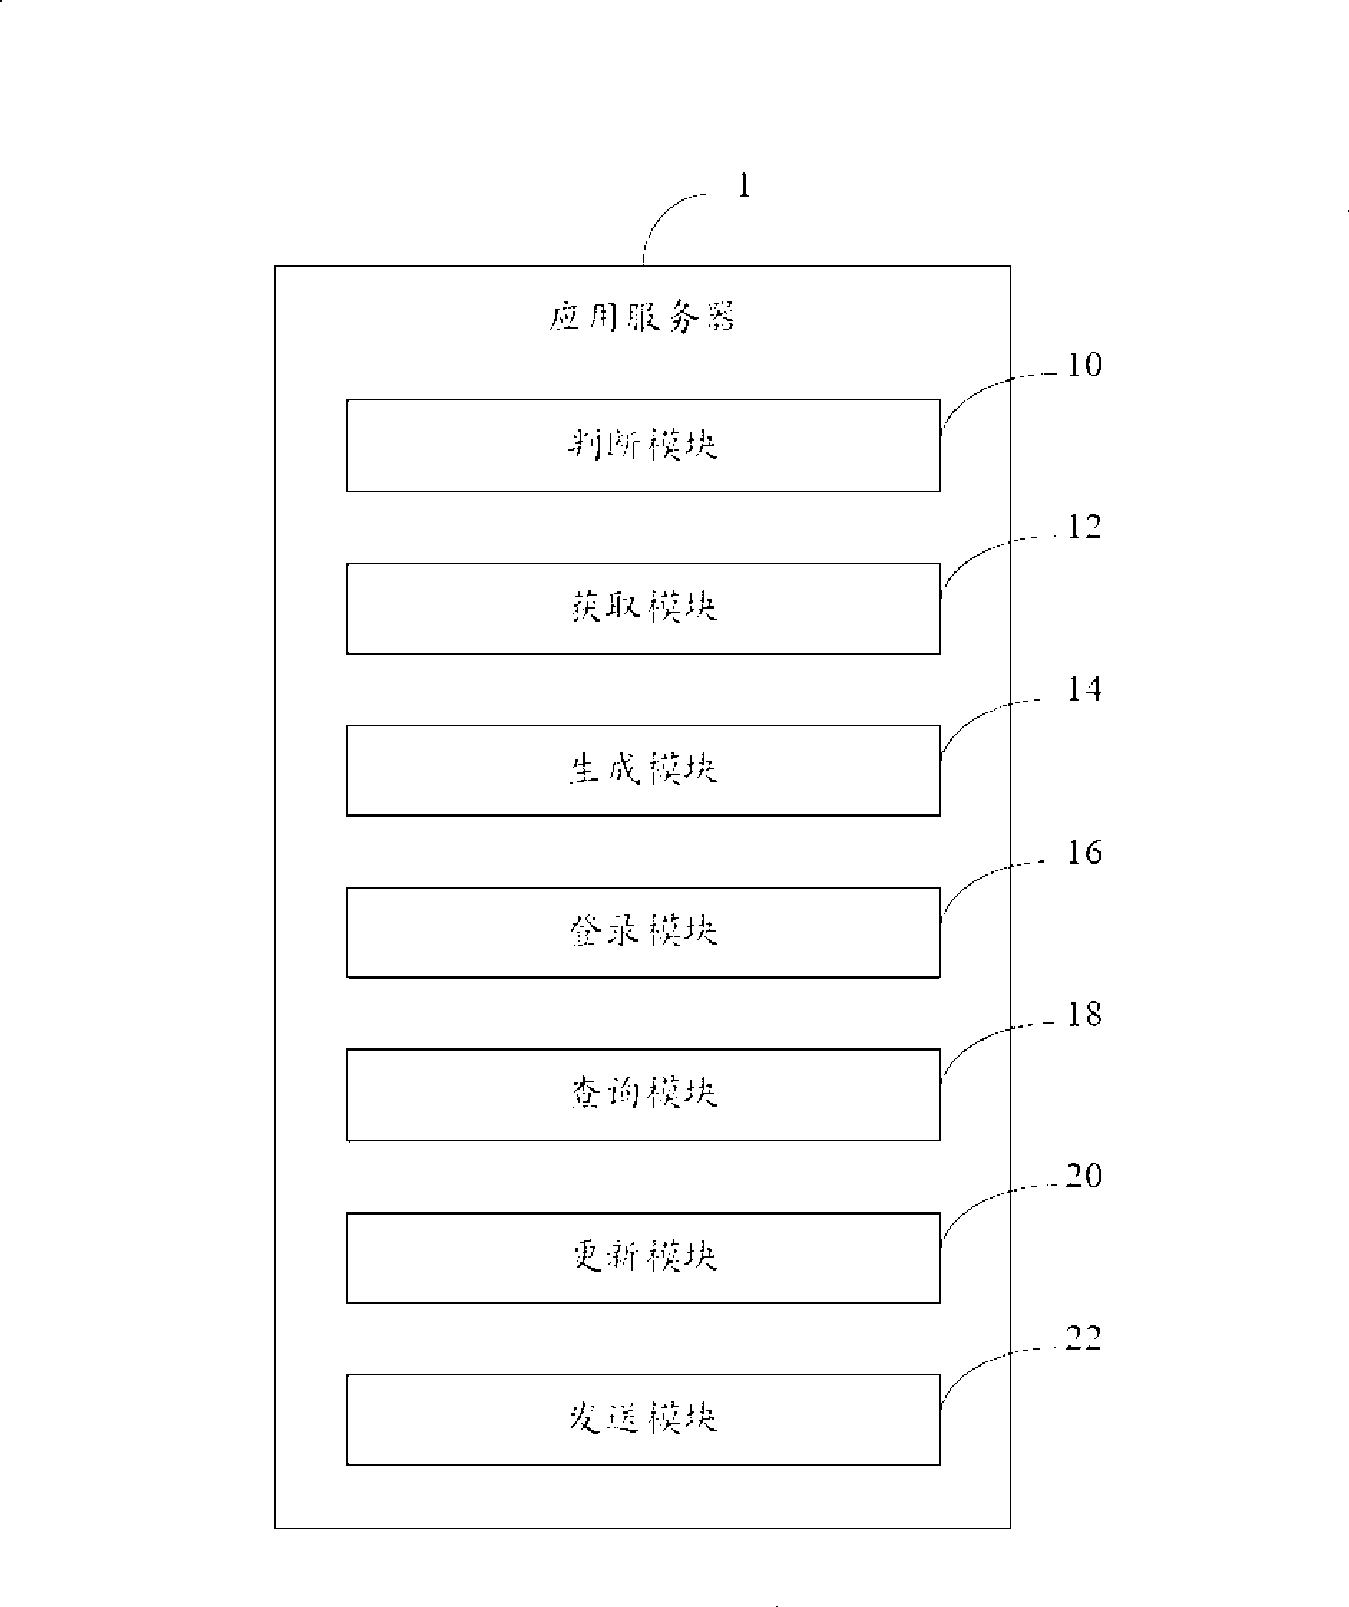 Automatic updating system and method for patent case inspection progress